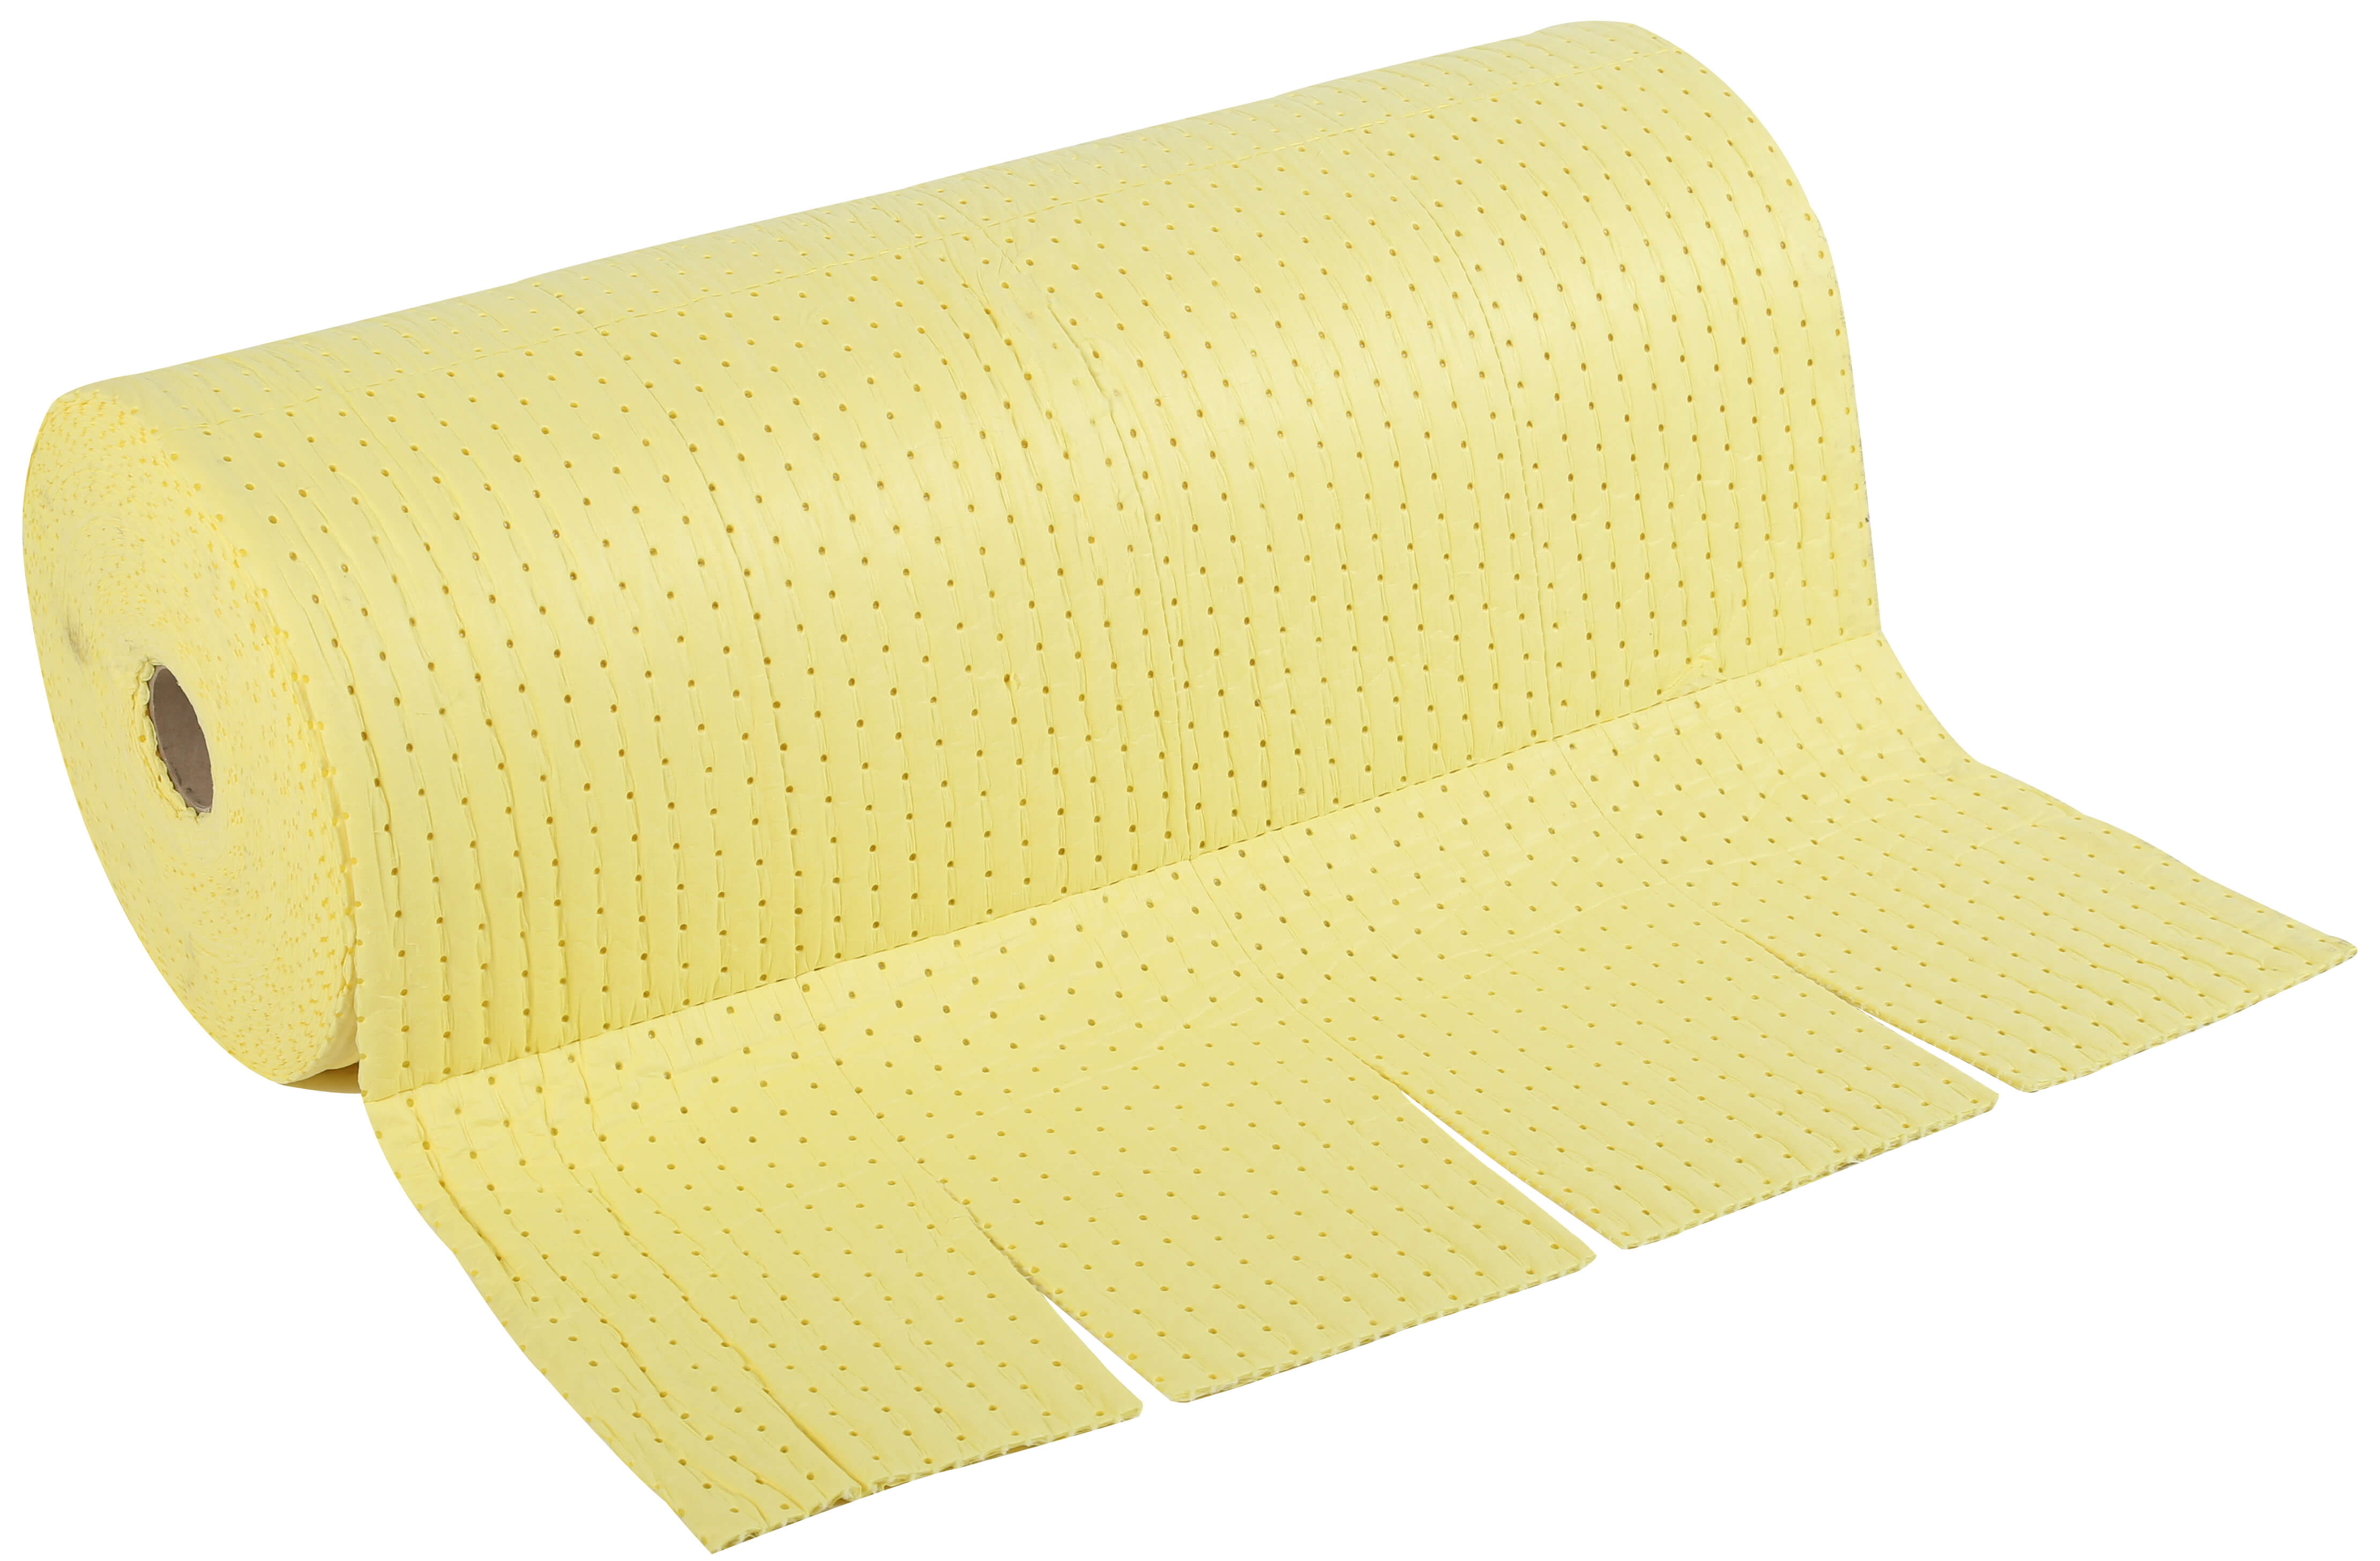 Premium Weight Chemical Absorbent Roll 96cm x 40M, Boxed 